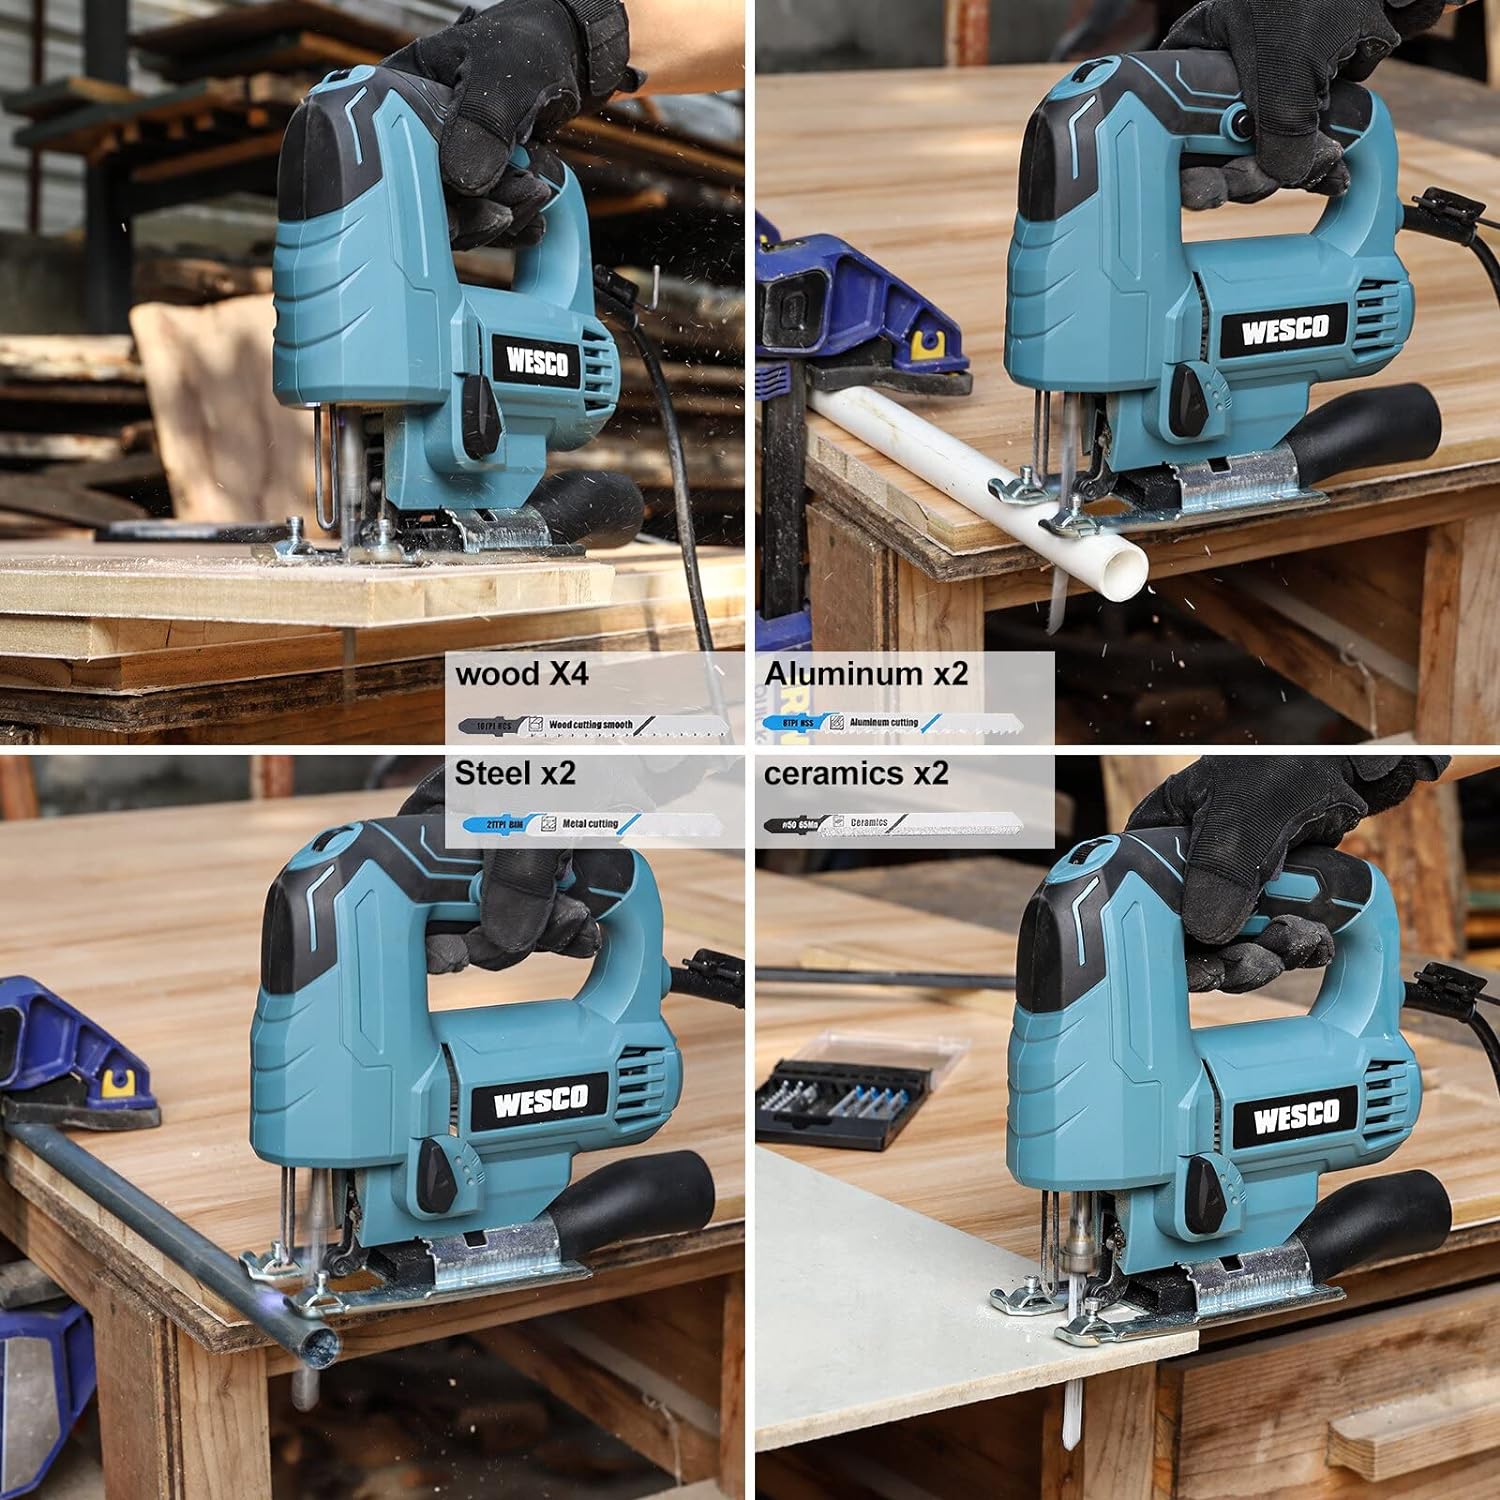 WESCO 4.5Amp Electric Jig Saw Tool with 6 Variable Speeds, 4 Orbital Sets, 45 Bevel Cutting, Max Cutting Depth 2-1/2inch, 0-3000SPM, with 10PCS Blades for Metal PVC Ceramic Wood Cutting